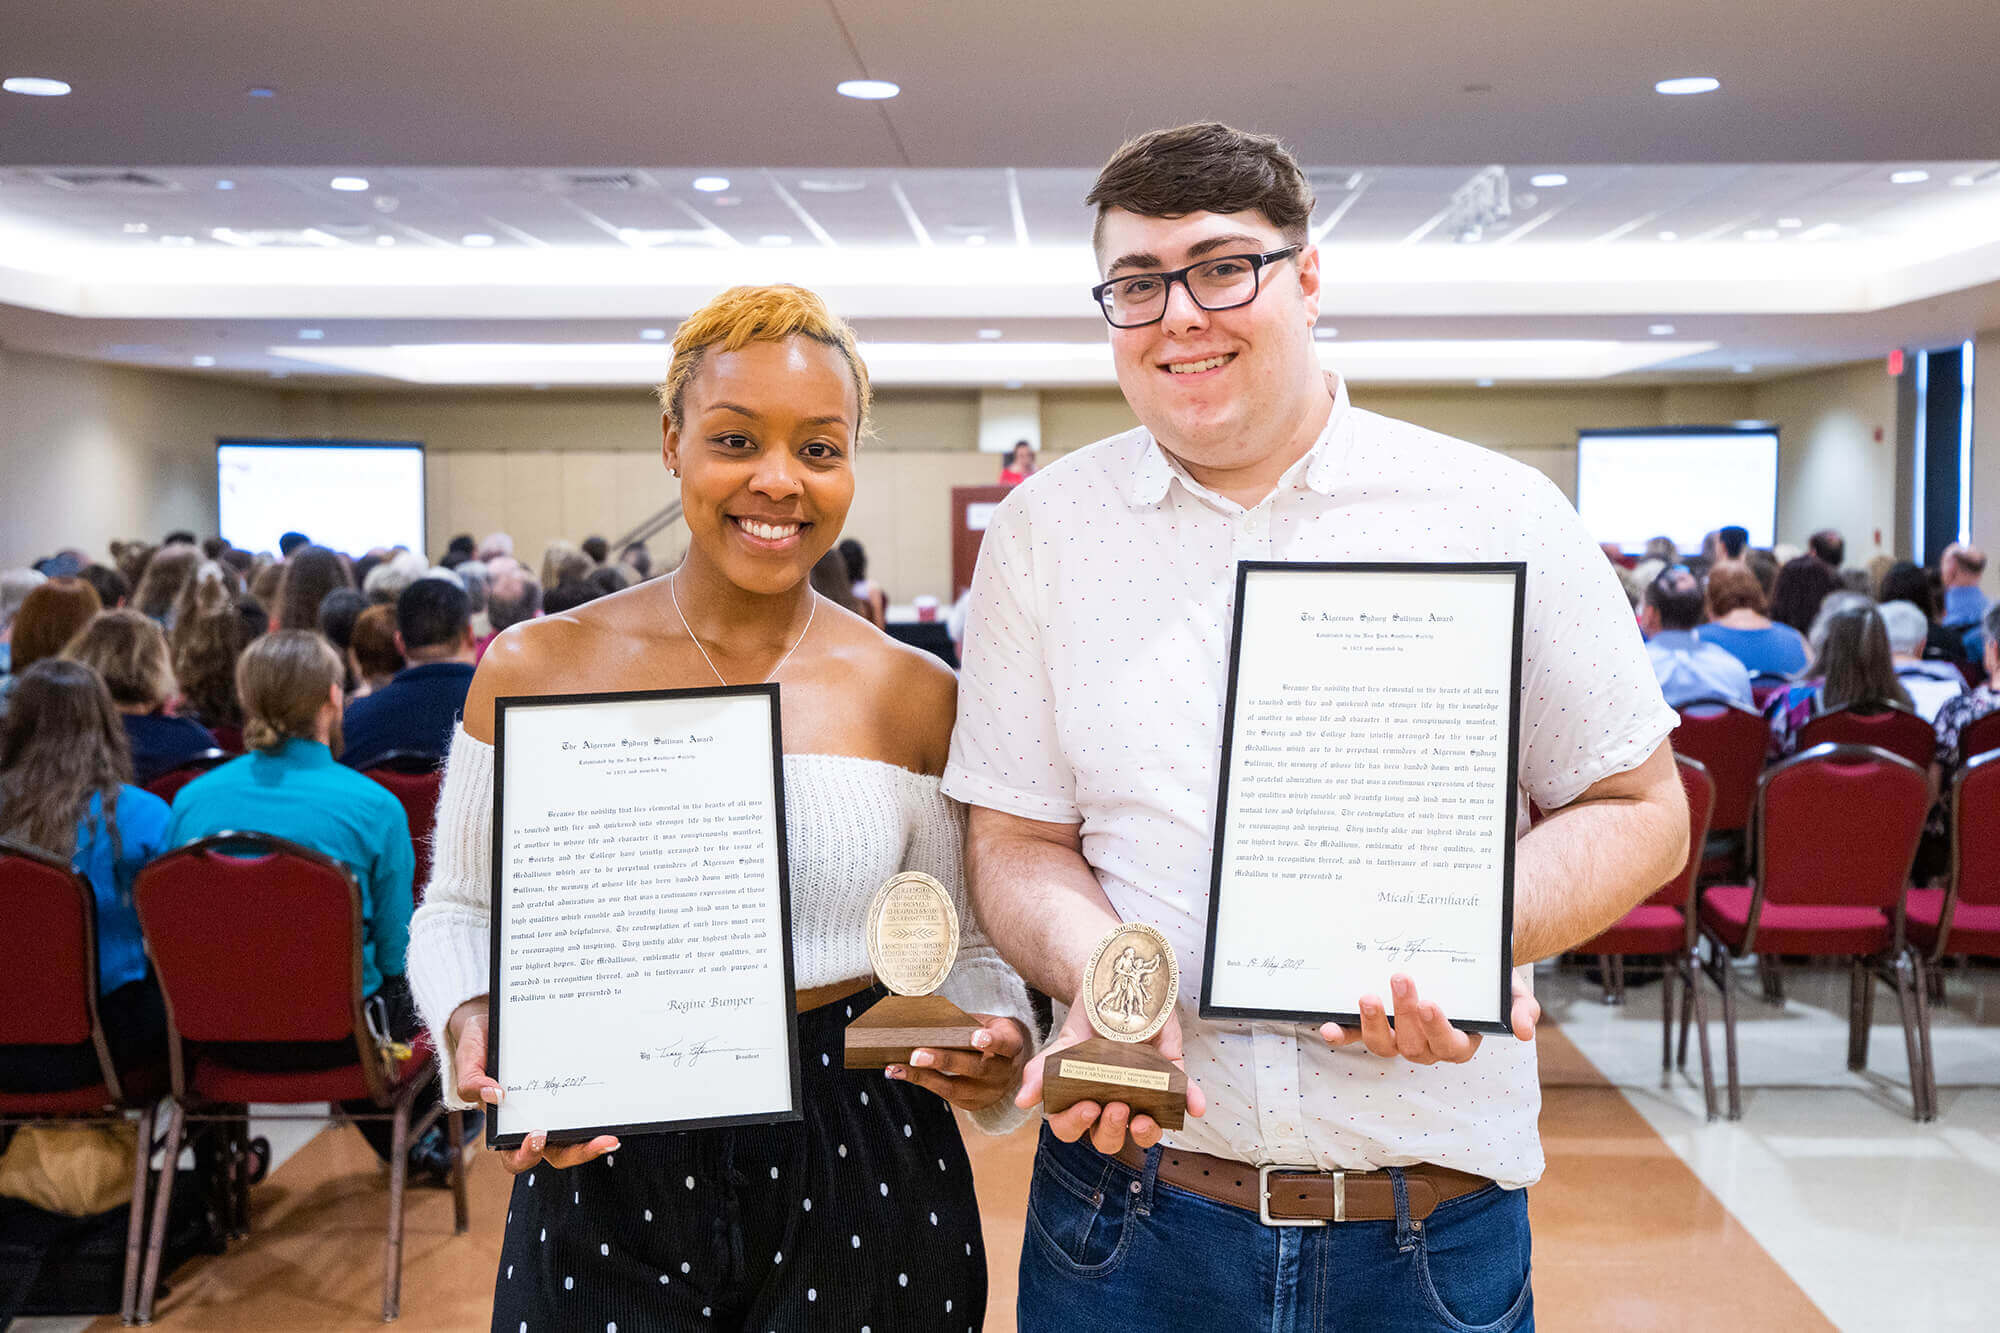 Algernon Sydney Sullivan Award Winners Honored Faculty and students receive award for inspiring others